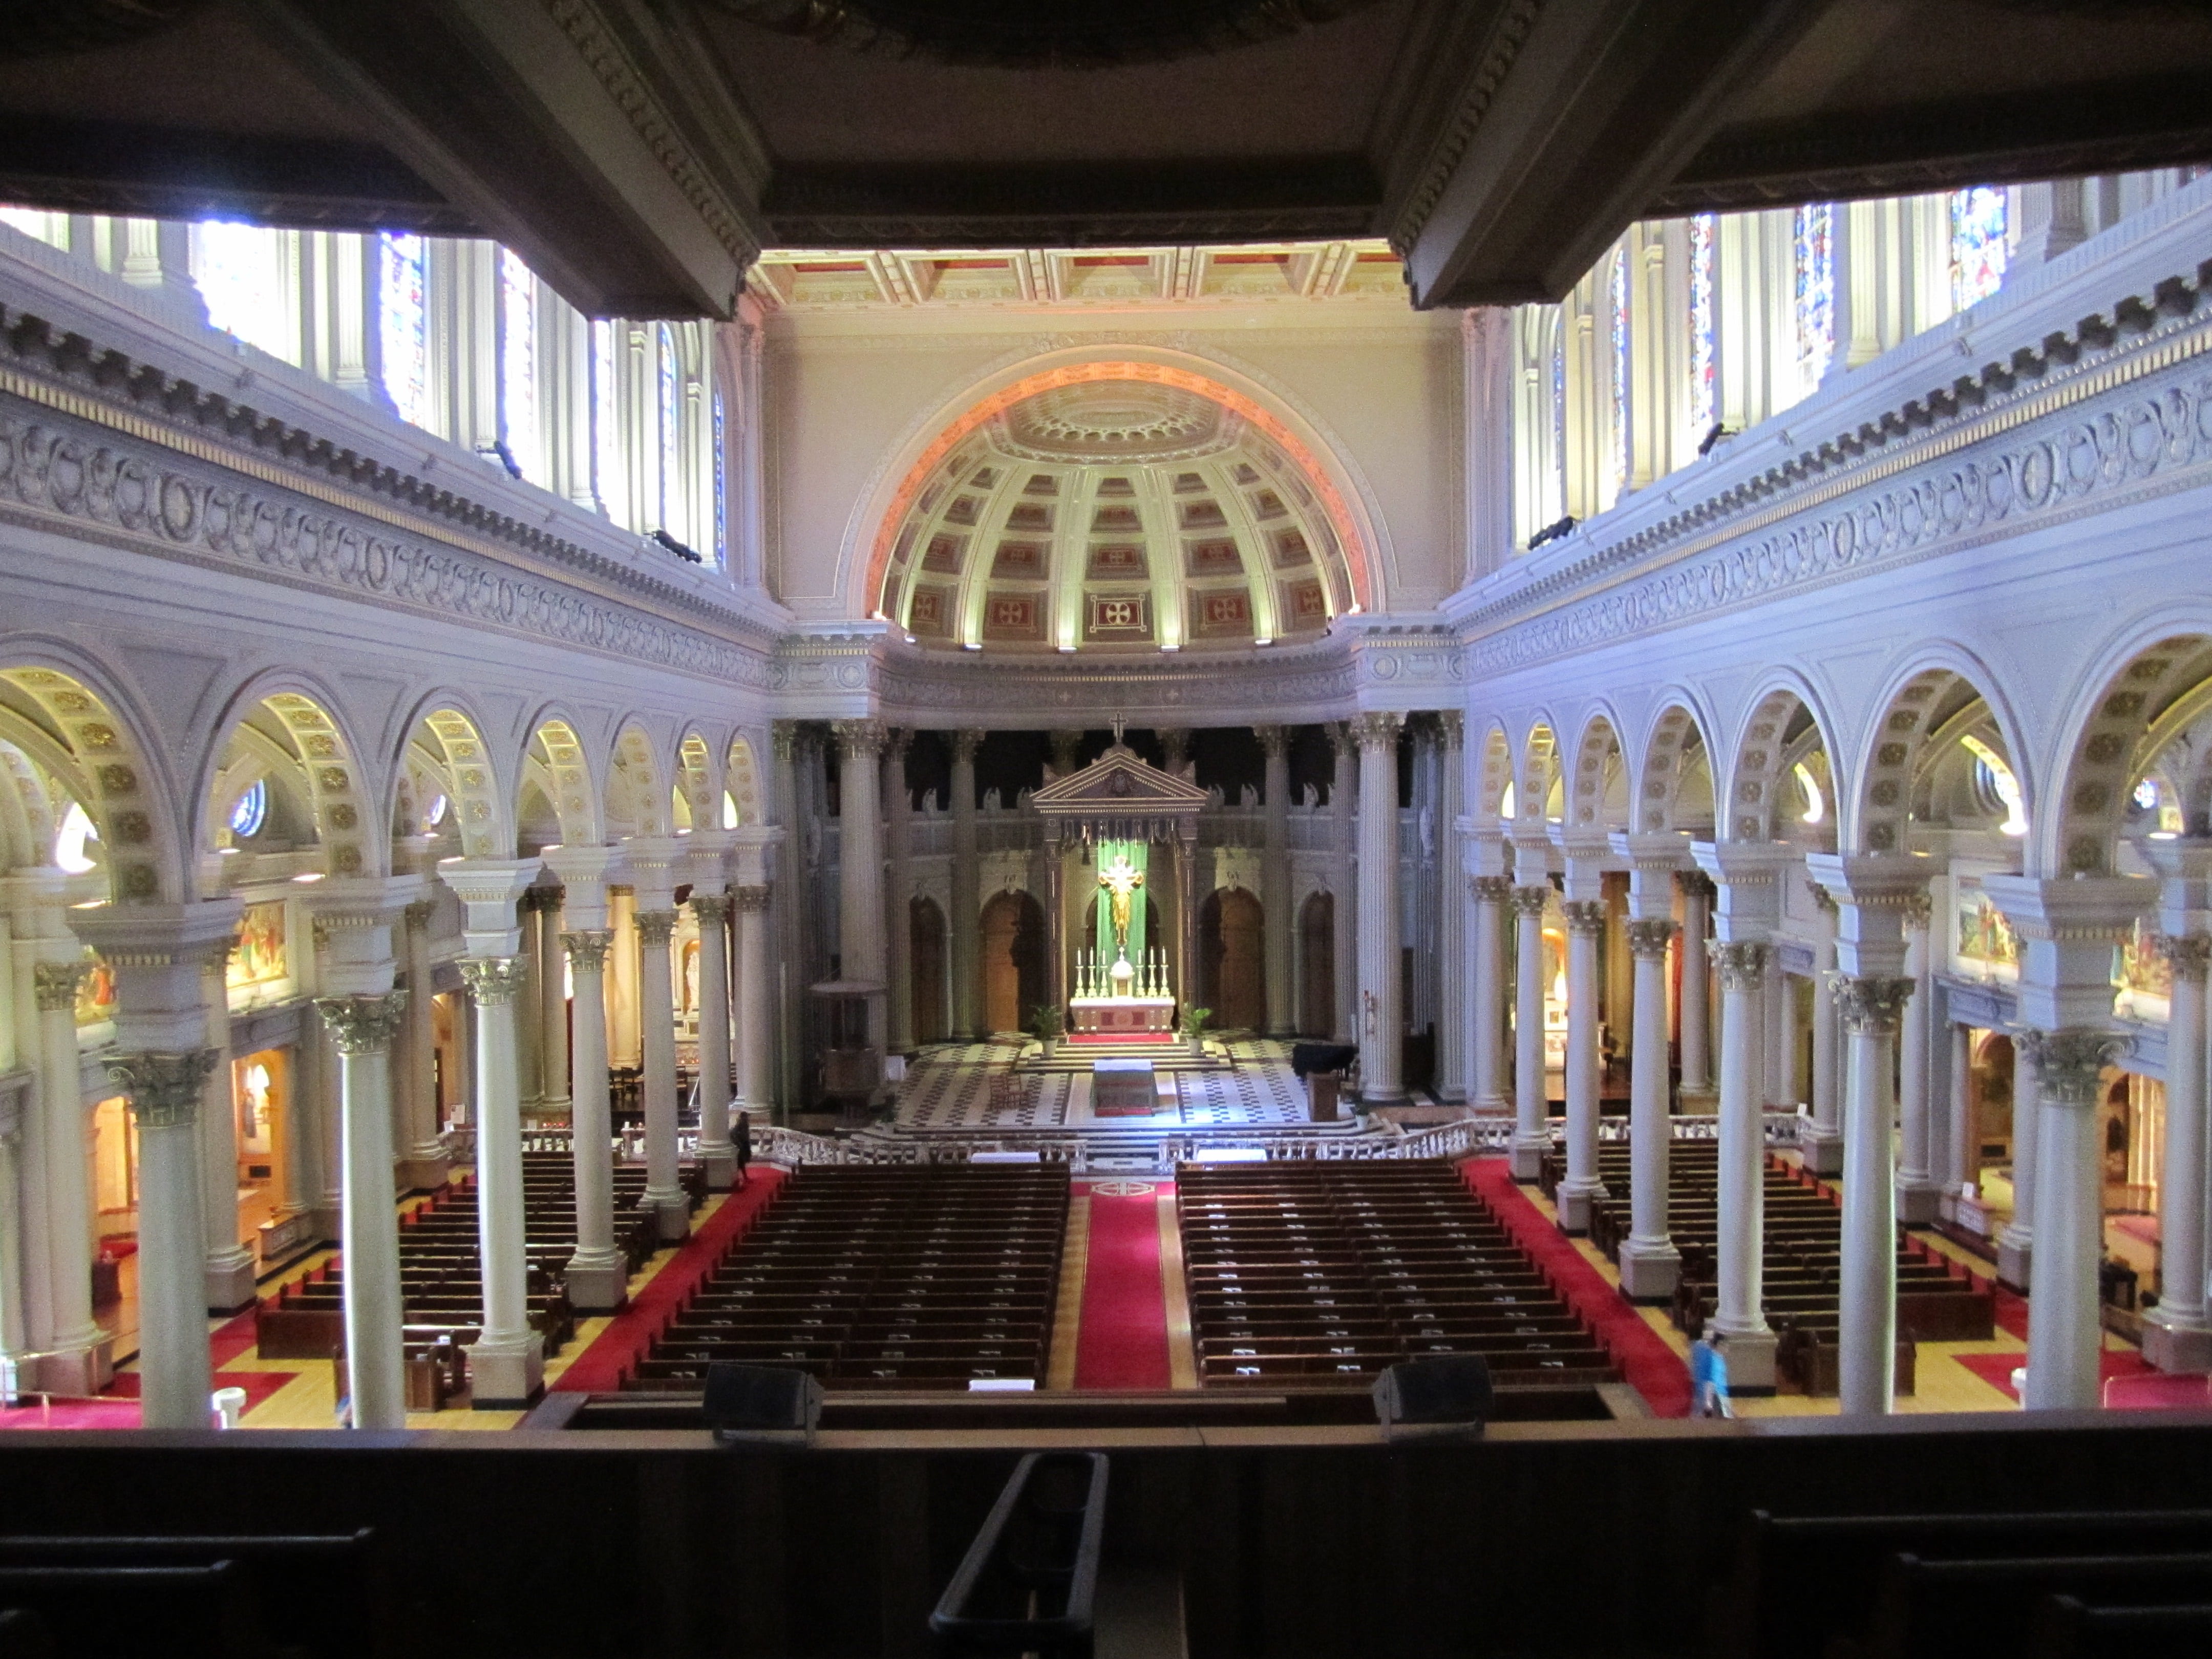 Here is the view from the original choir loft where our journey began